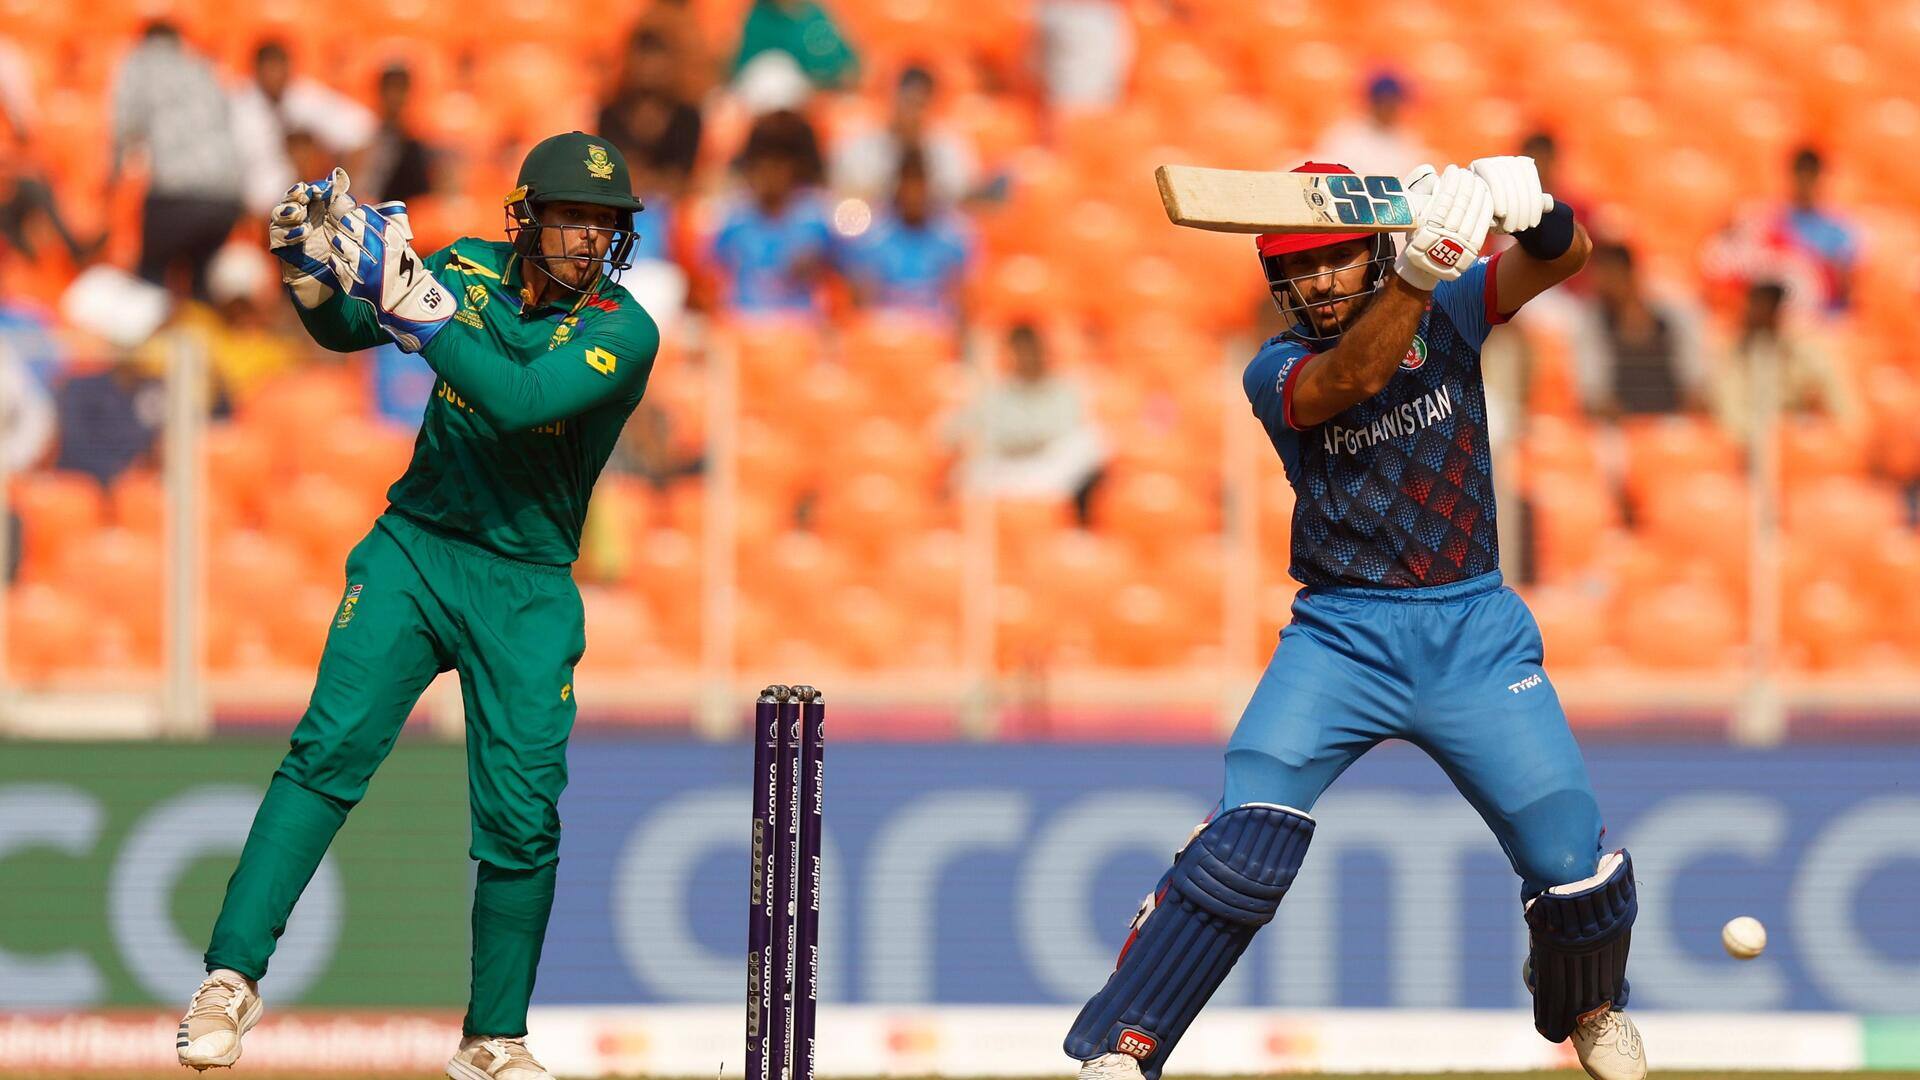 ICC World Cup, South Africa overcome Afghanistan: Key stats